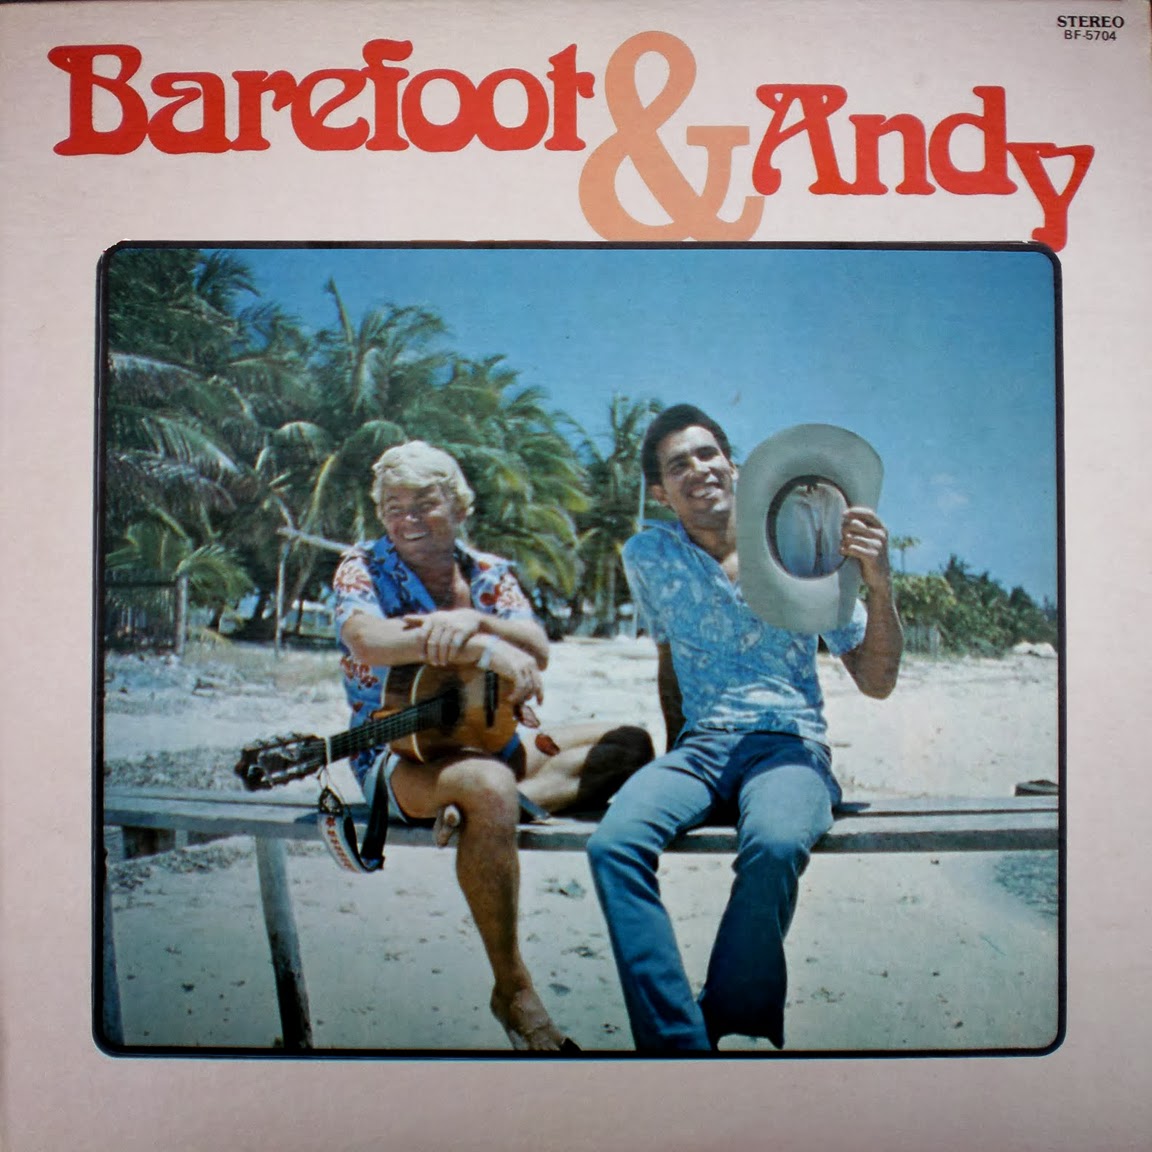   The Barefoot Man &Andy Martin – Barefoot & Andy (1976) Barefoot+&+Andy+cover